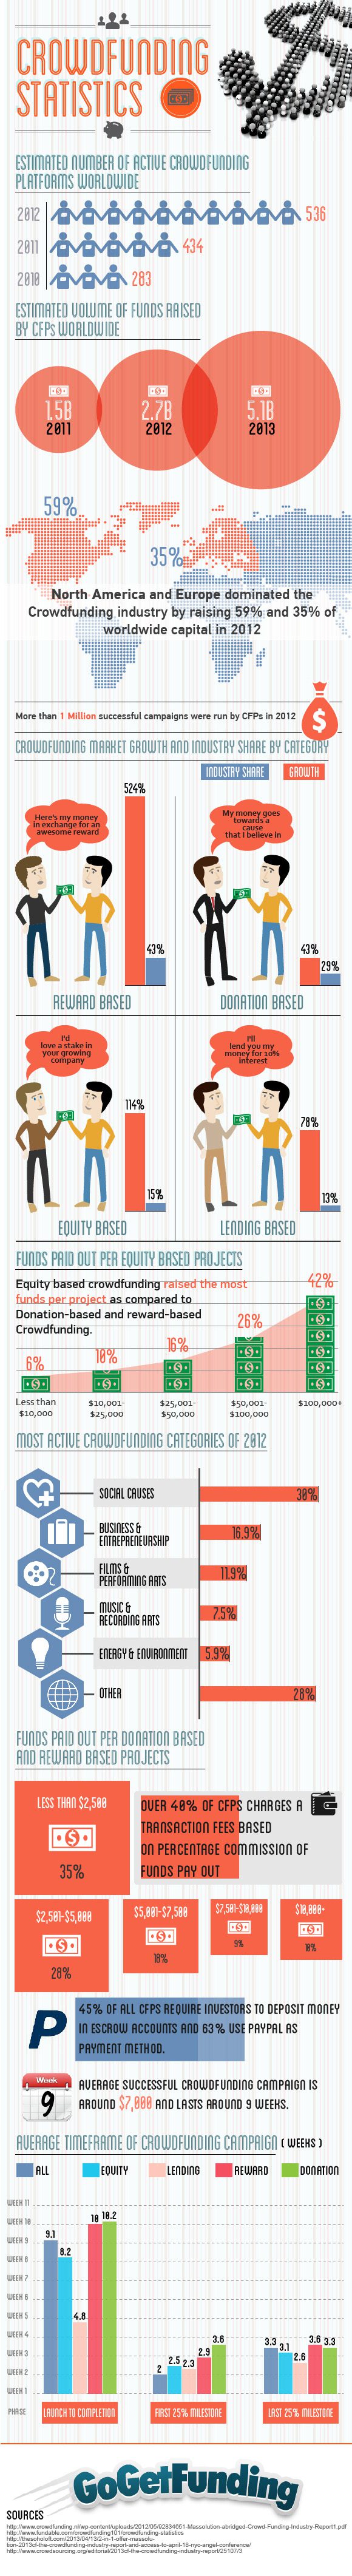 Growth Rate of the 4 Major Crowdfunding Categories